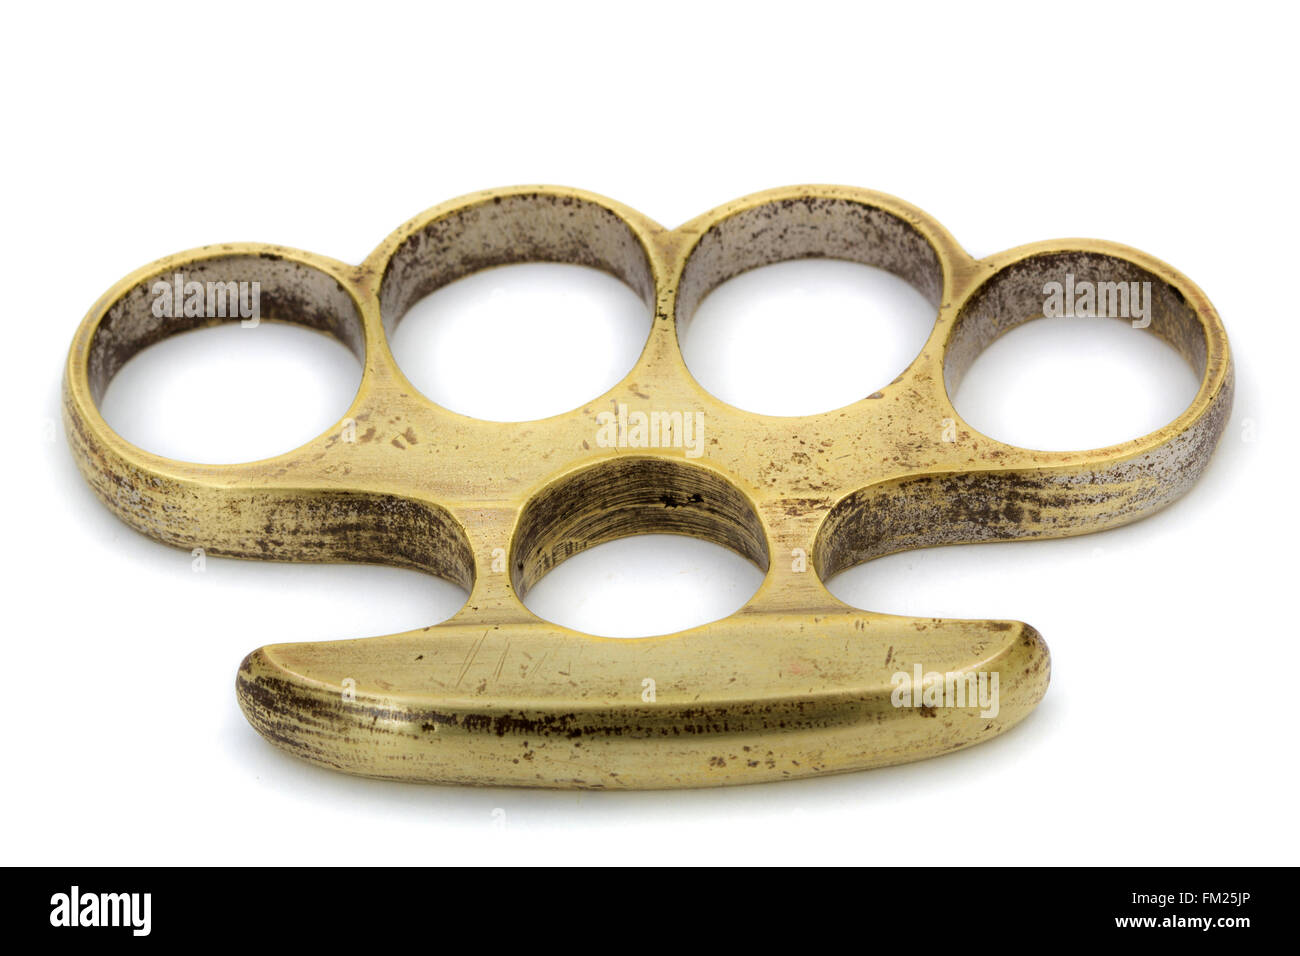 https://c8.alamy.com/comp/FM25JP/brass-knuckle-duster-weapon-for-hand-isolated-on-white-background-FM25JP.jpg